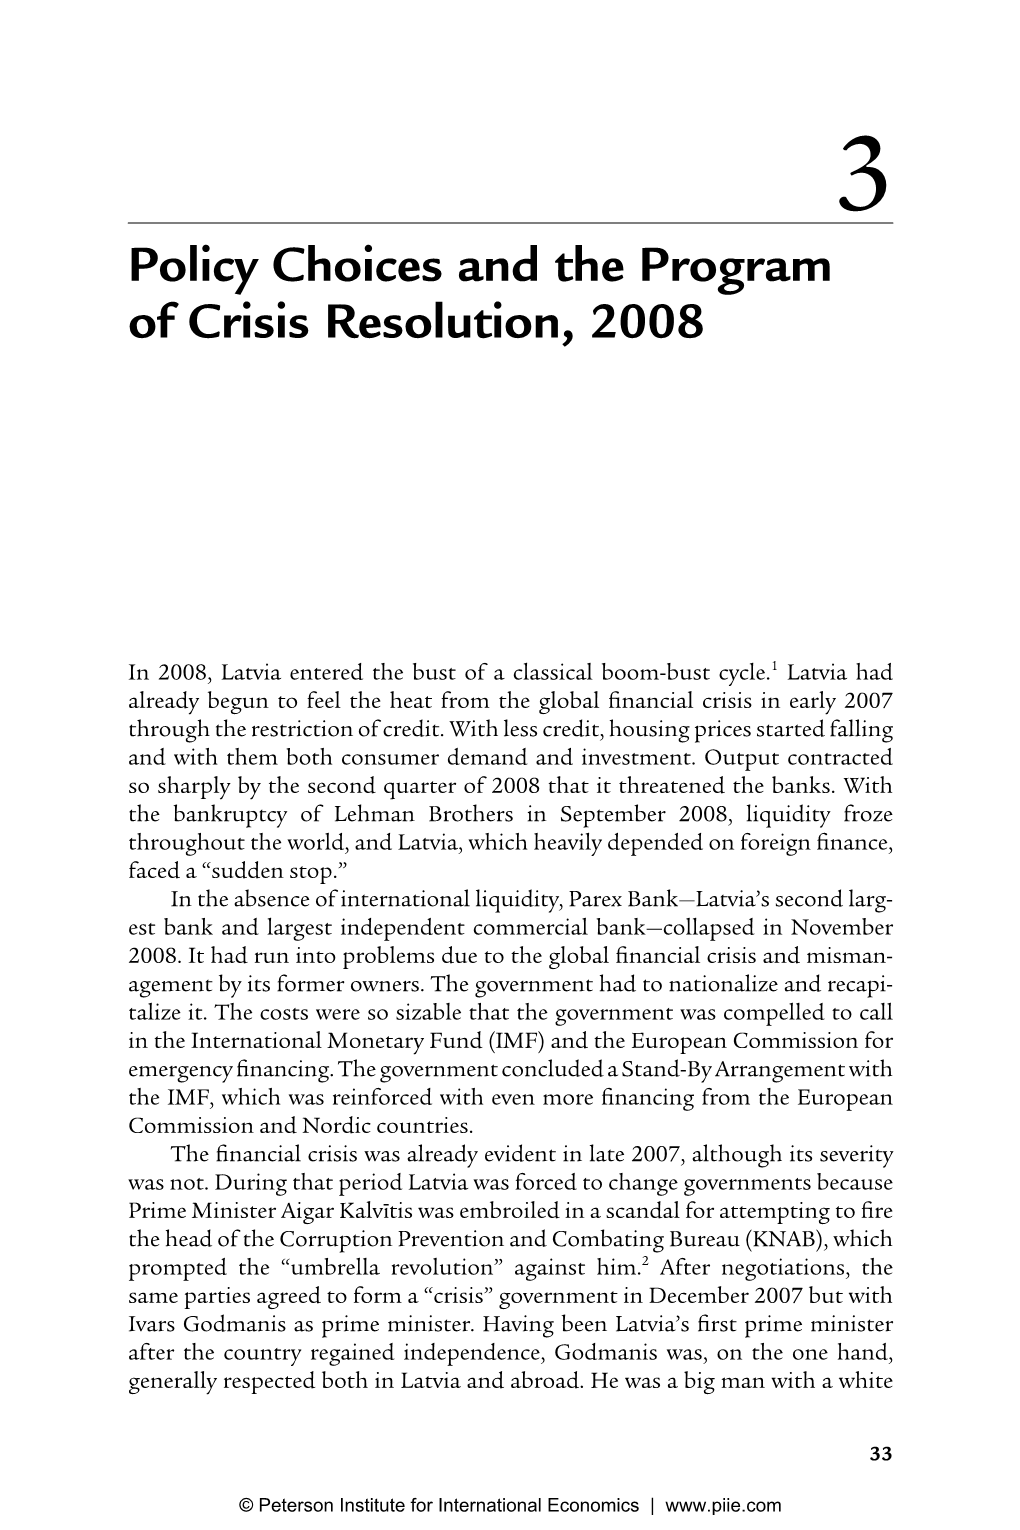 Policy Choices and the Program of Crisis Resolution, 2008